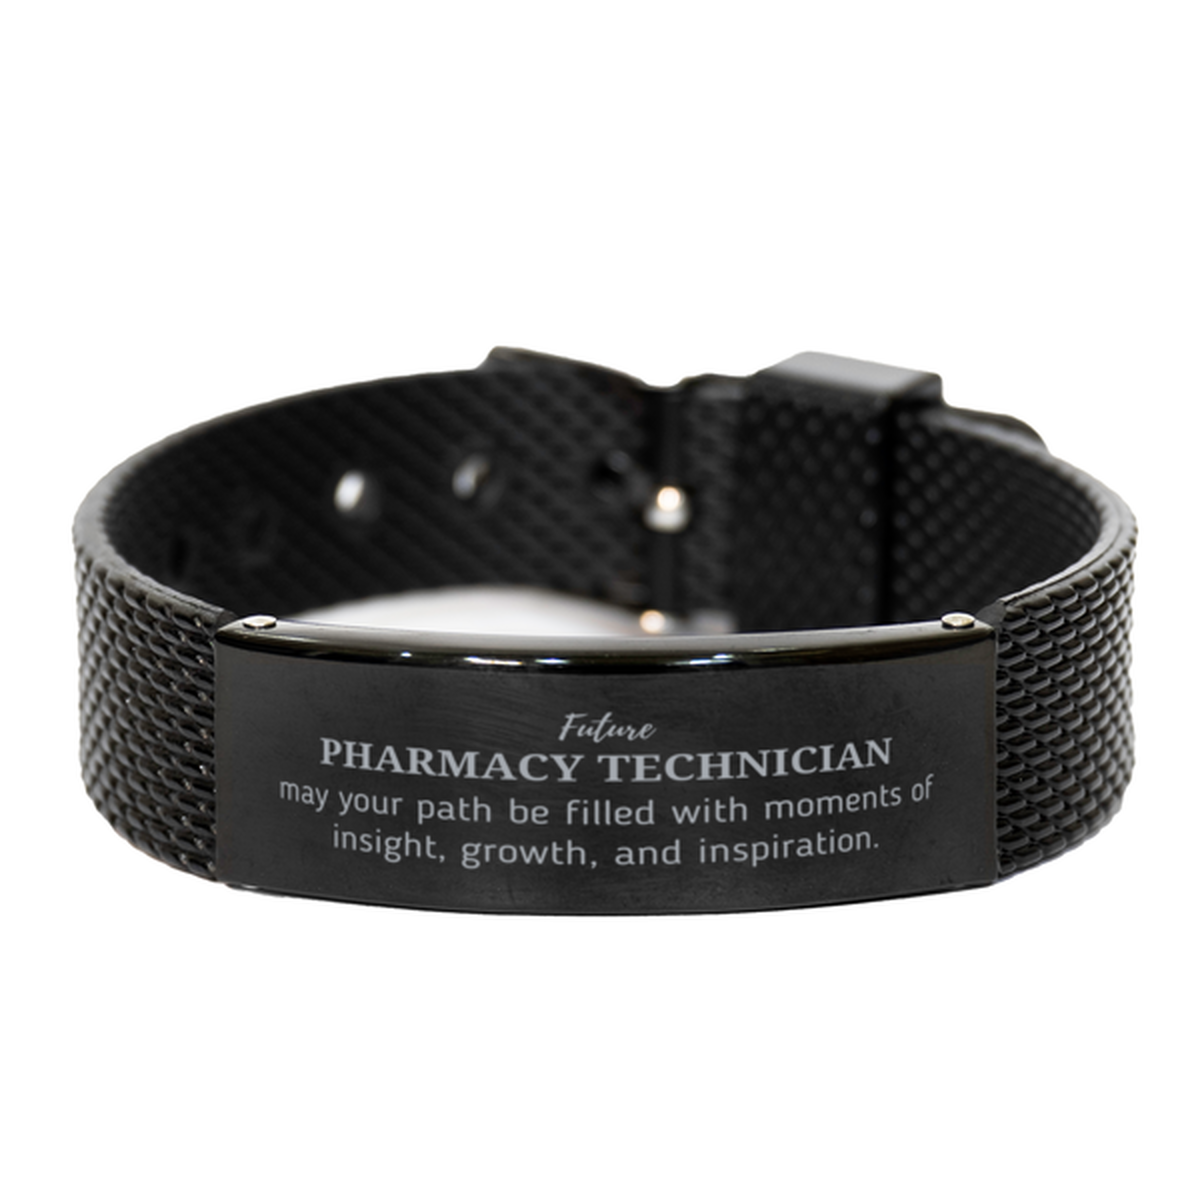 Future Pharmacy Technician Gifts, May your path be filled with moments of insight, Graduation Gifts for New Pharmacy Technician, Christmas Unique Black Shark Mesh Bracelet For Men, Women, Friends